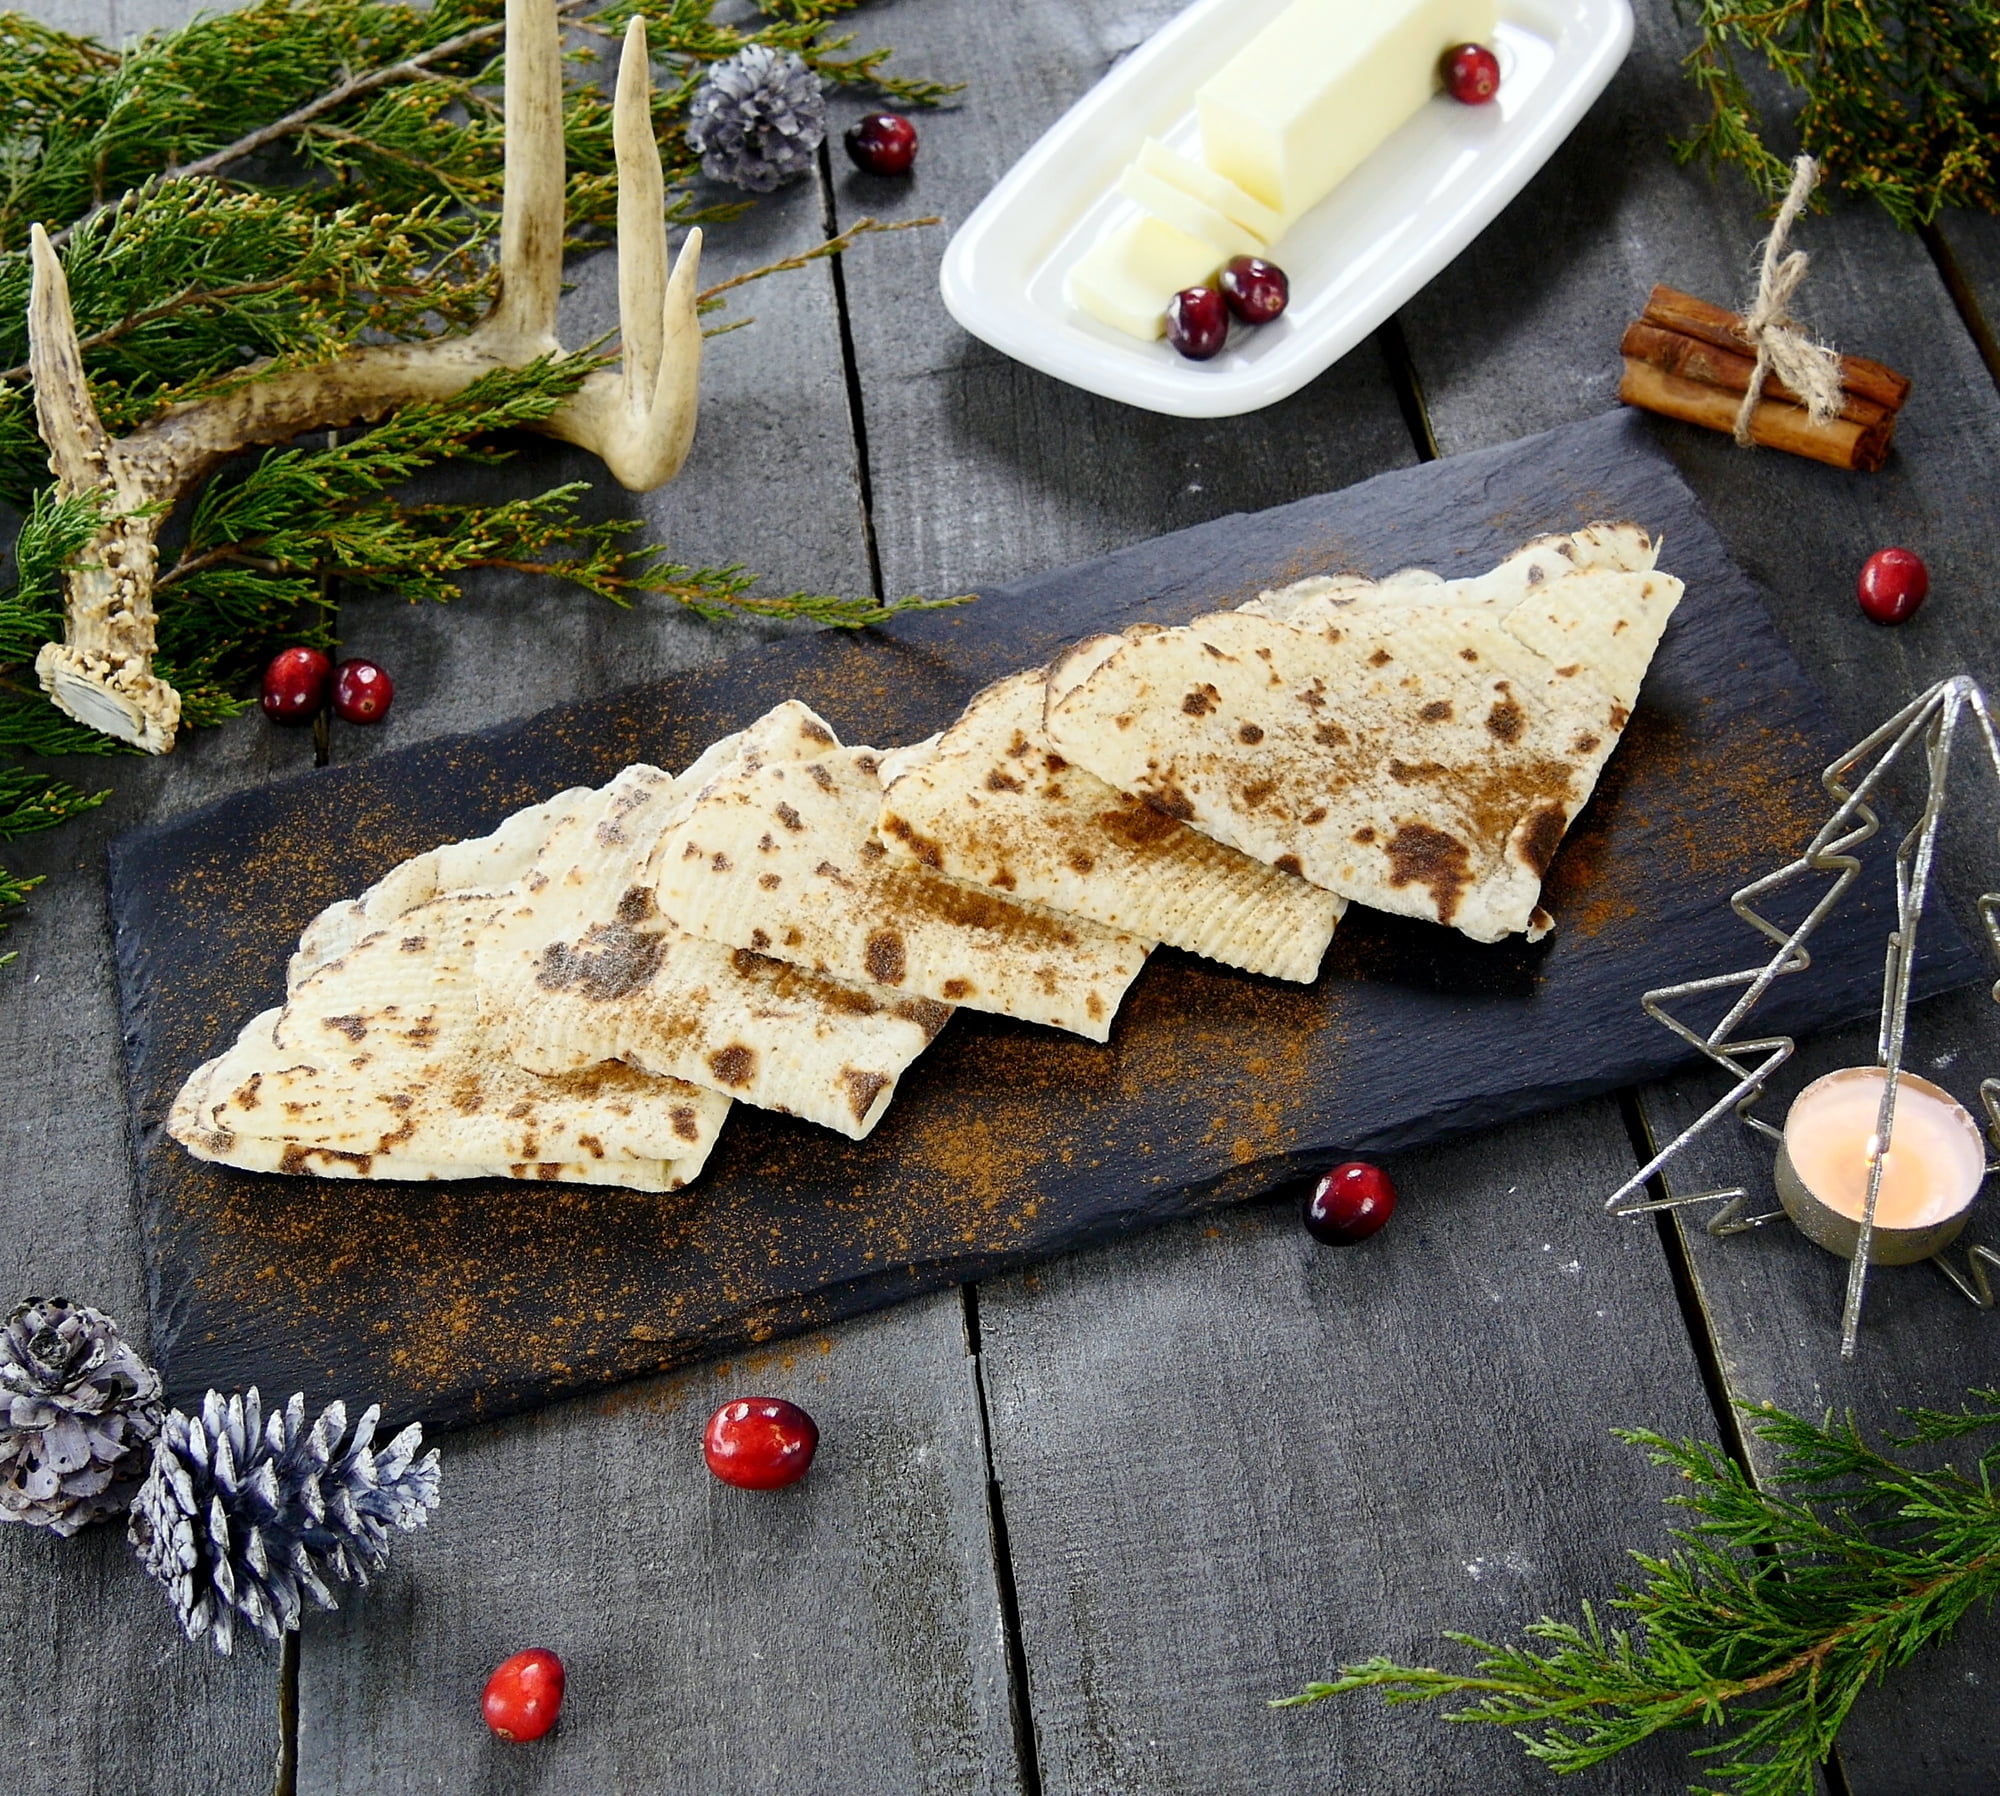 Bethany Housewares Heritage Grill / Lefse Griddle - Nonstick Silverstone